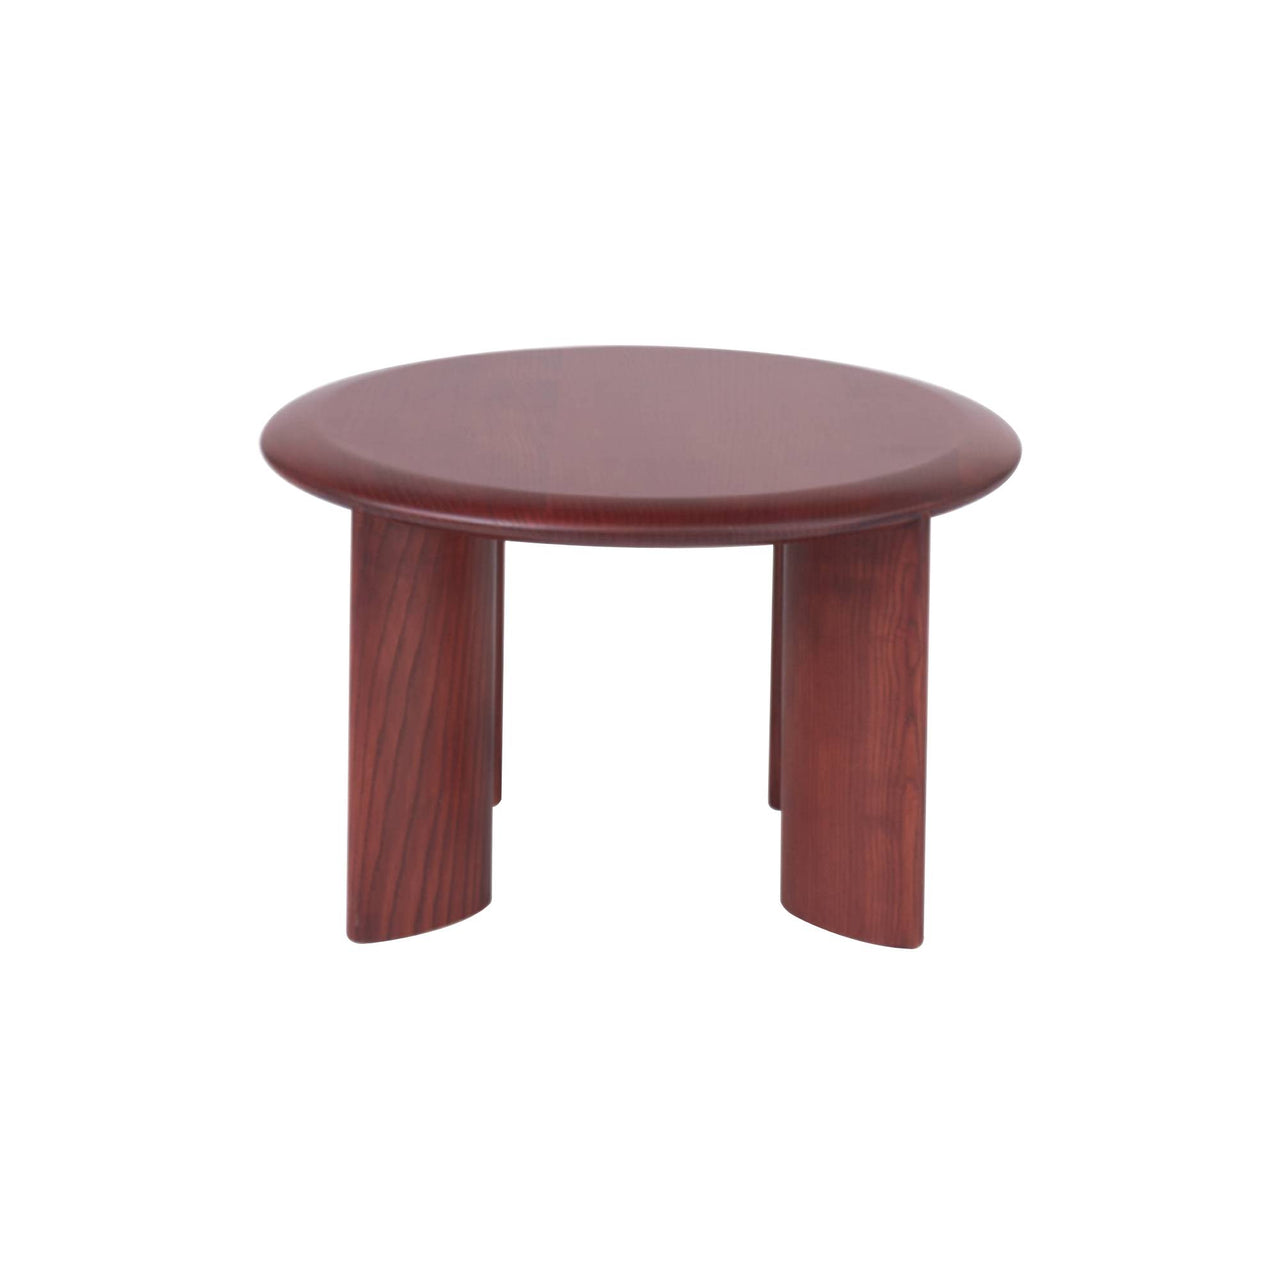 IO Side Table: Vintage Red